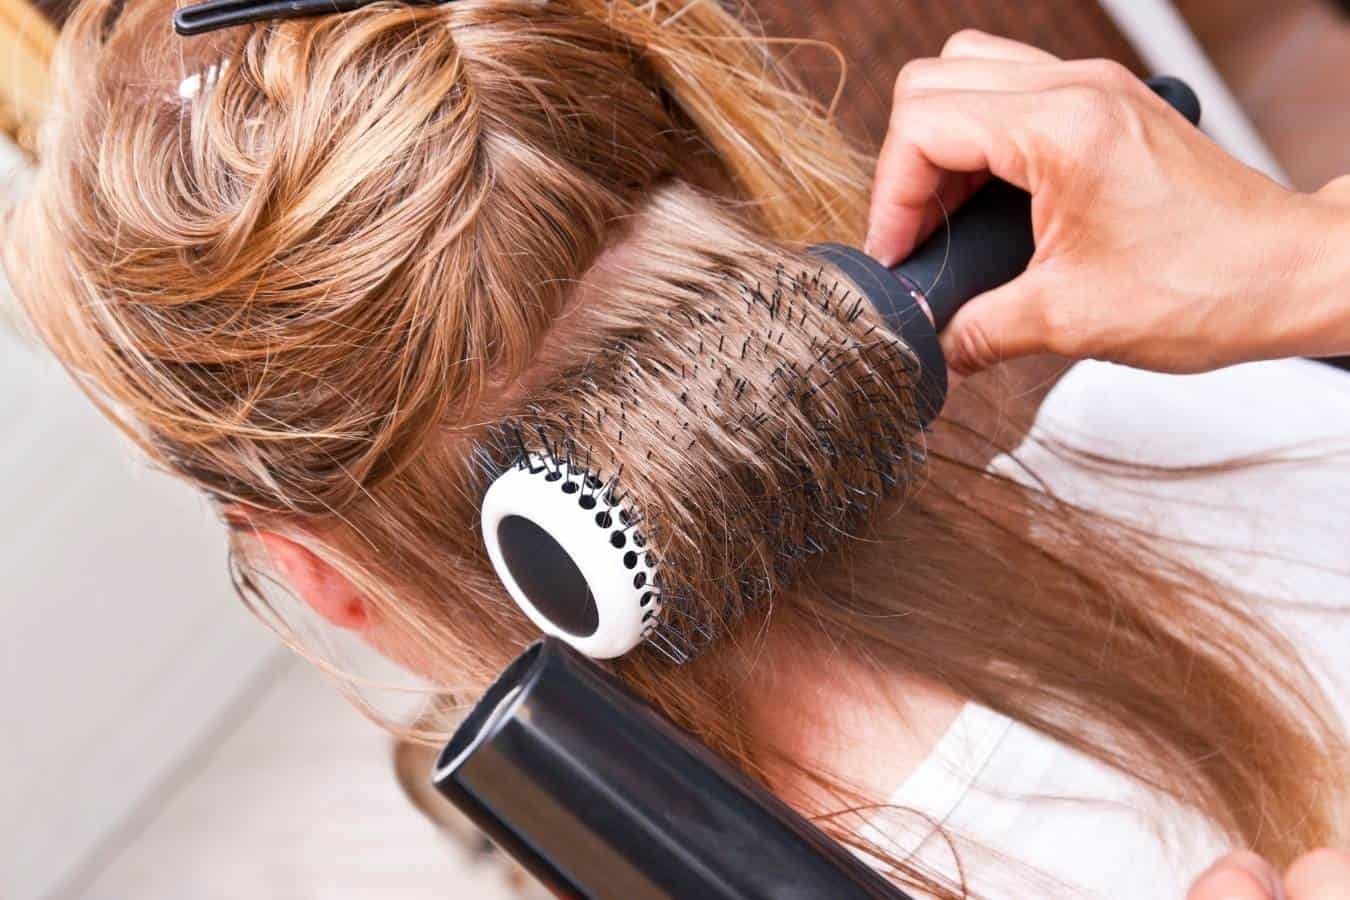 How To Do A Blowout Treatment at Home